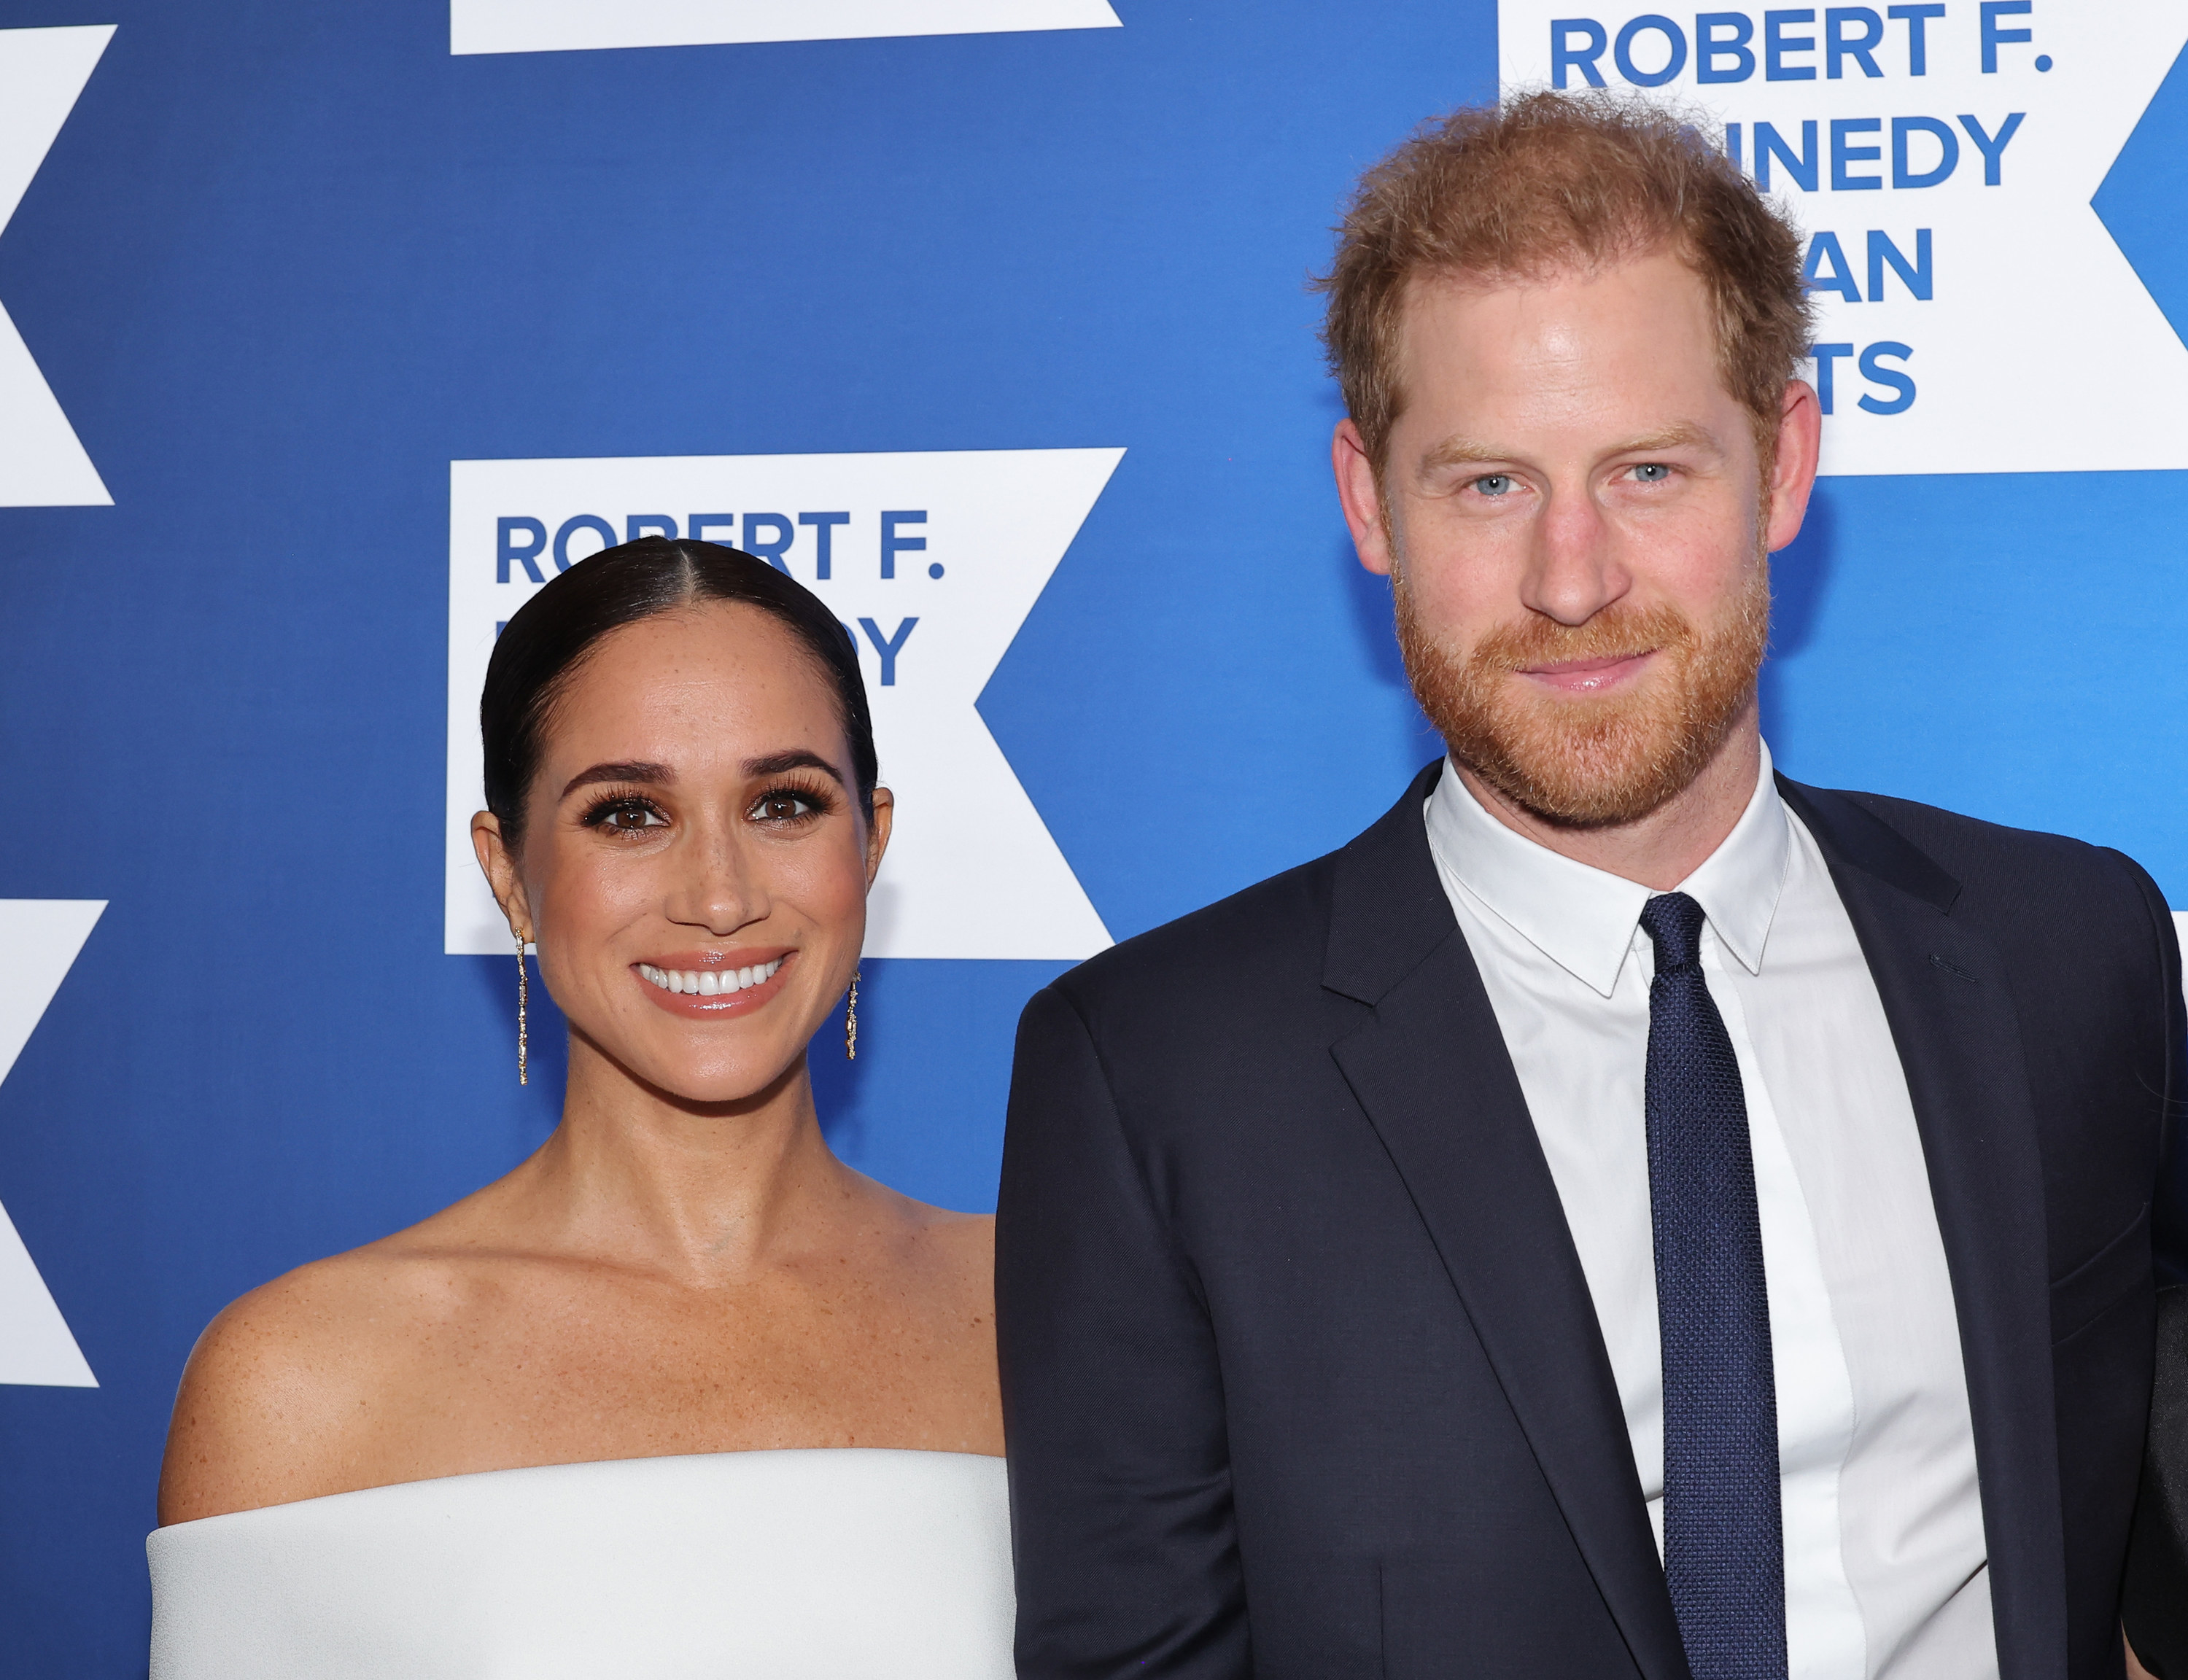 A closeup of meghan and harry at a red carpet event